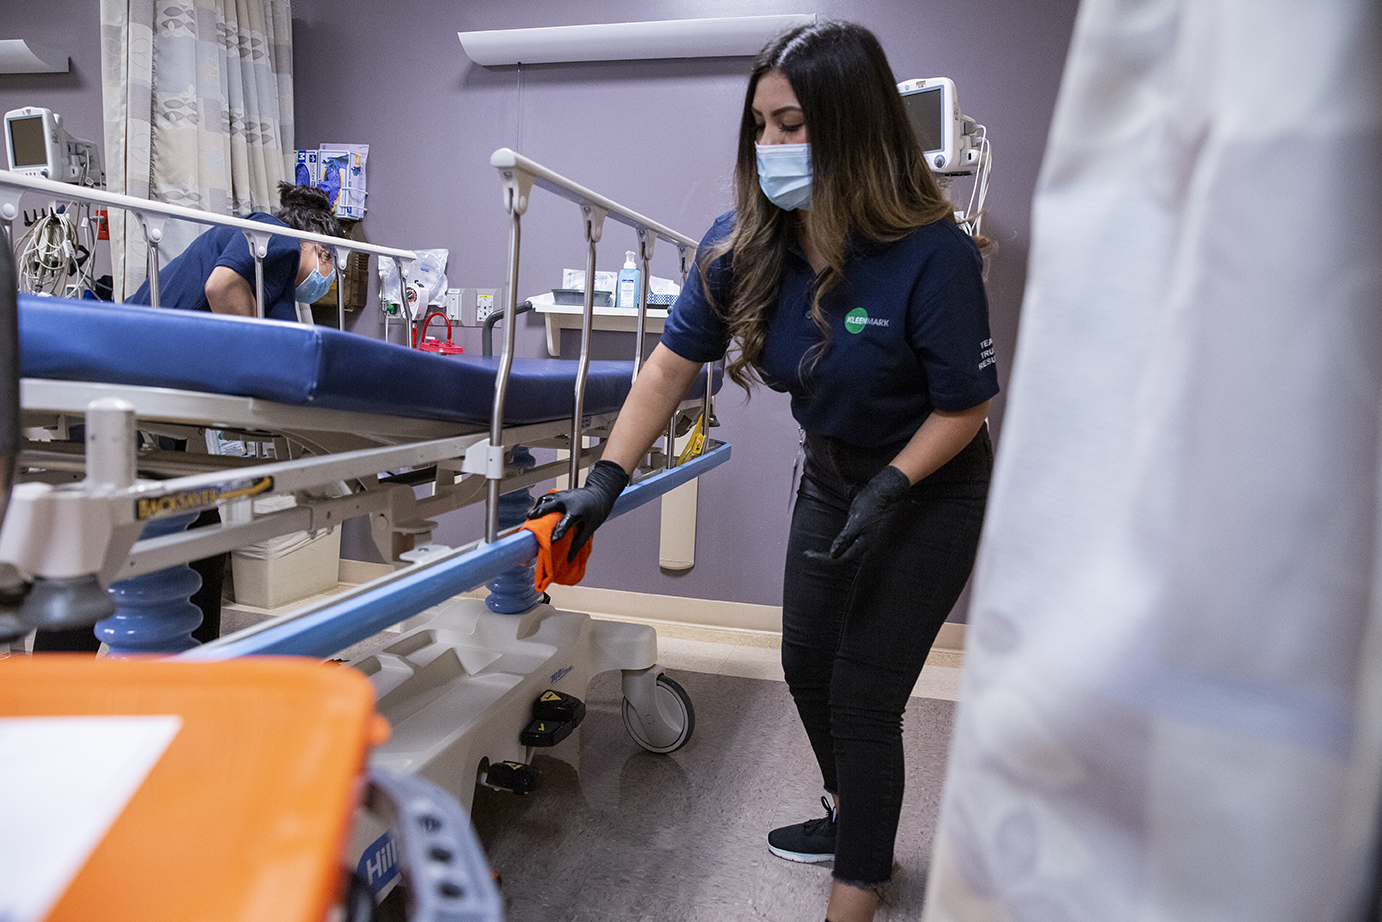 Our Kleen Team provides hospital cleaning services in Madison, WI and beyond.